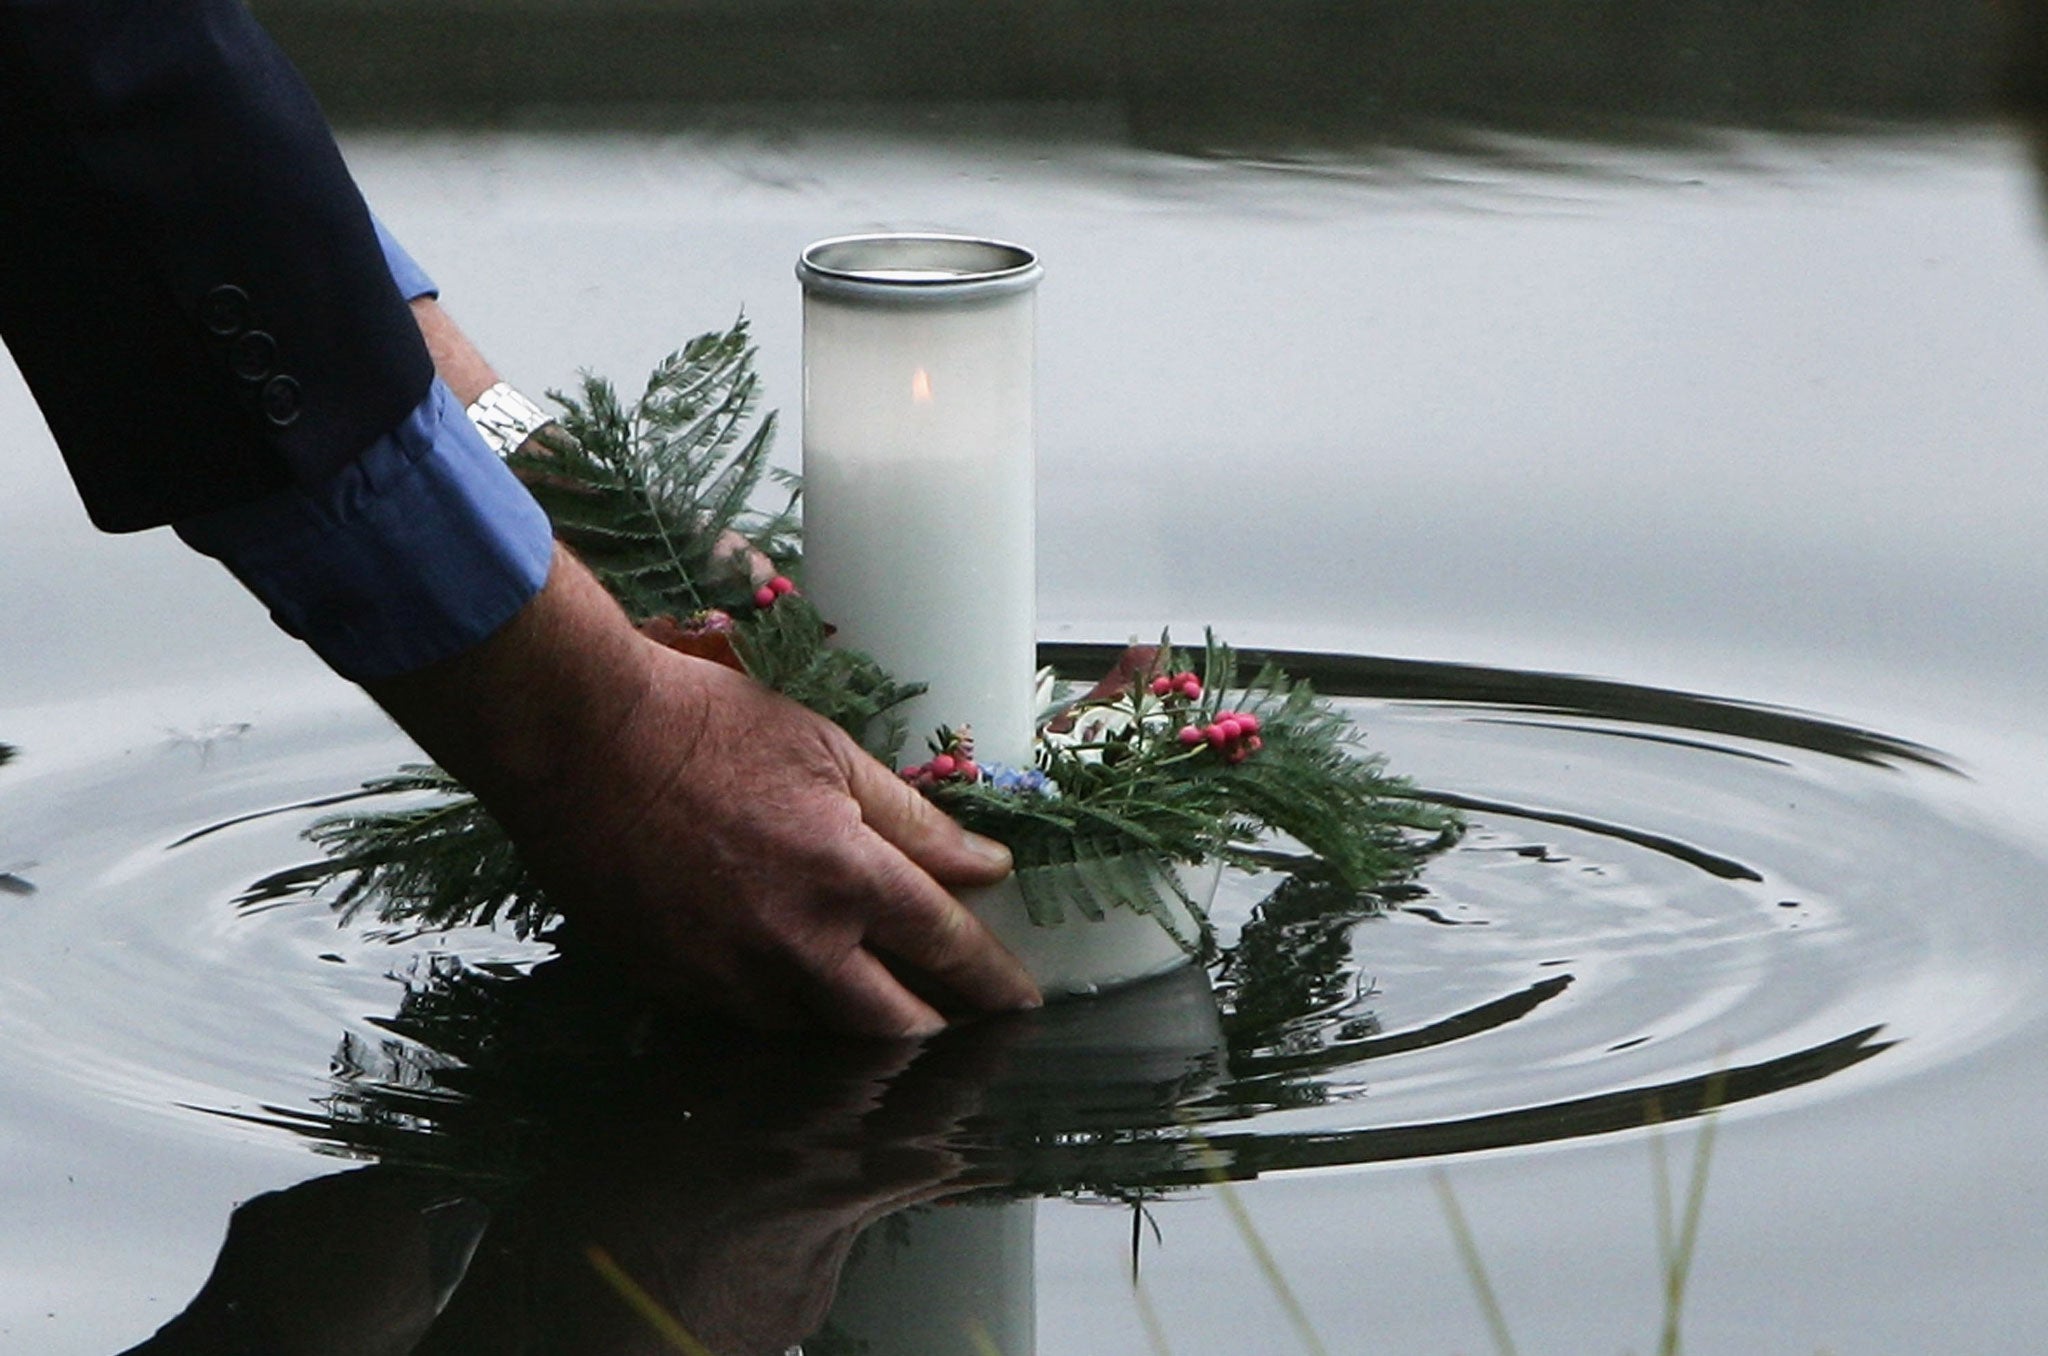 Keith Moulton, whose daughter and two grand daughters were killed at the Port Arthur massacre, lays a floating candle in the reflection pool at the memorial site during a memorial service to mark the 10th aniversary of the massacre April 28, 2006 in Port Arthur, Australia.